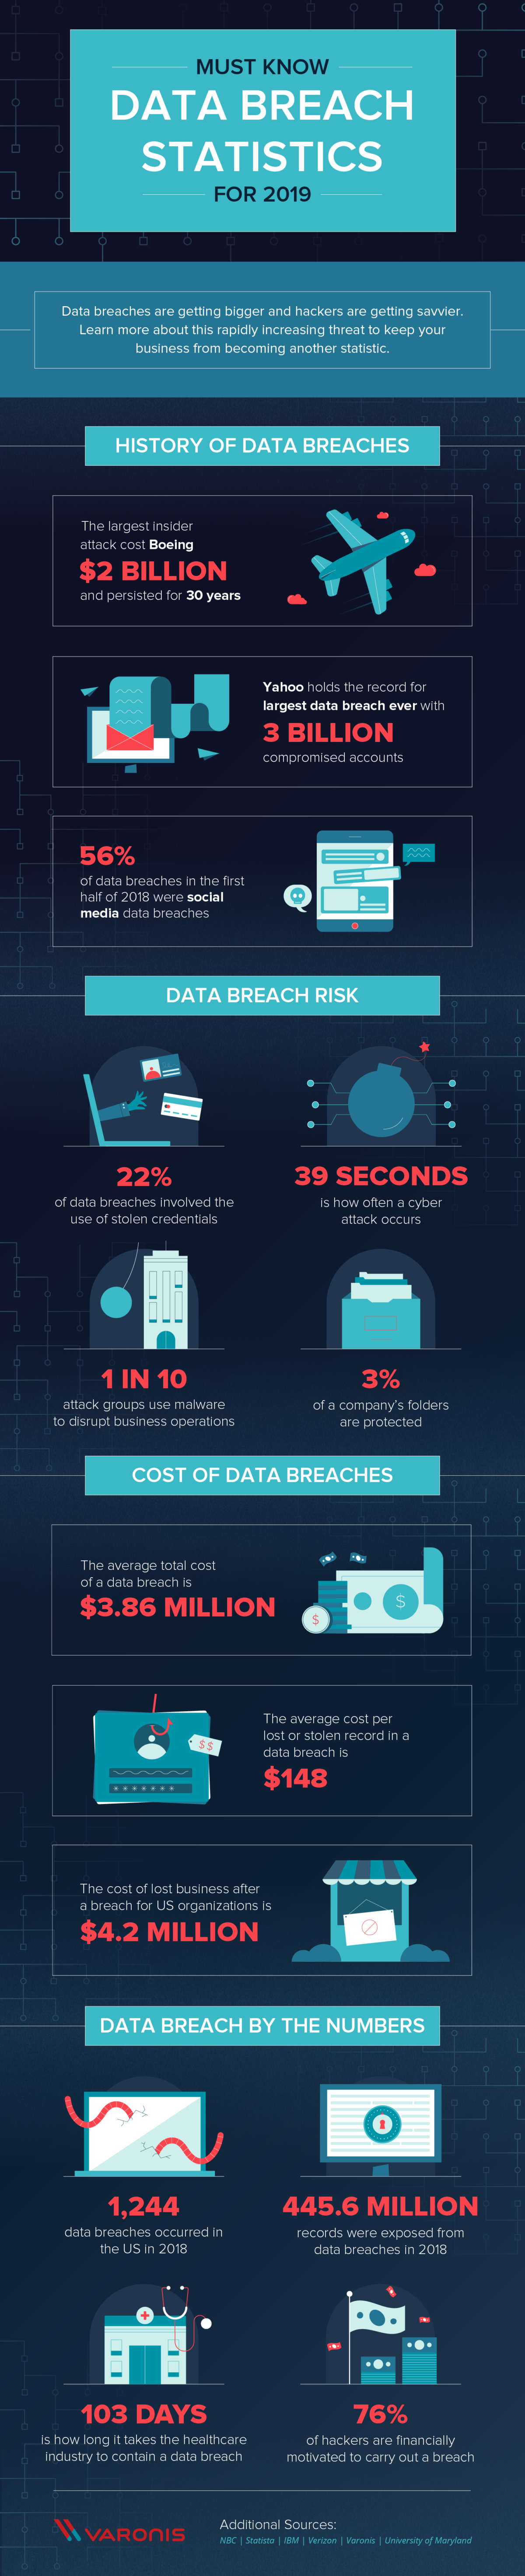 56 Must Know Data Breach Statistics for 2019 #infographic